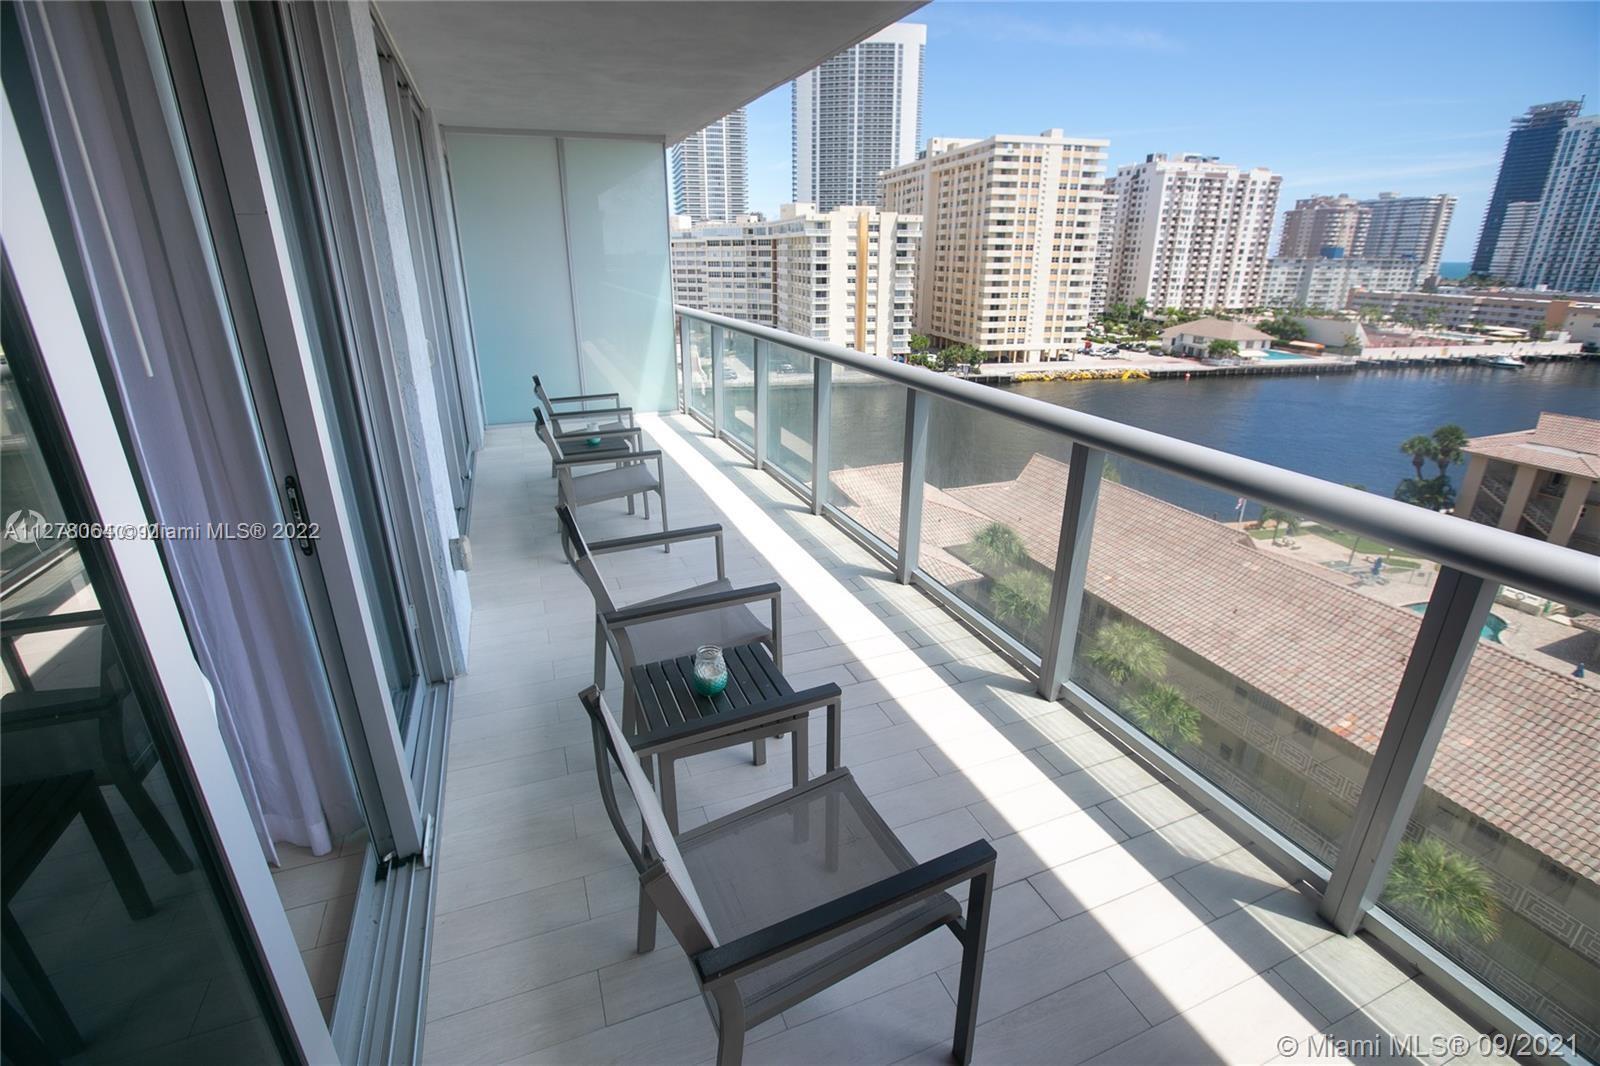 Spacious 2 bedroom condo with amazing views of intercostal from the large terrace.  Large spacious b